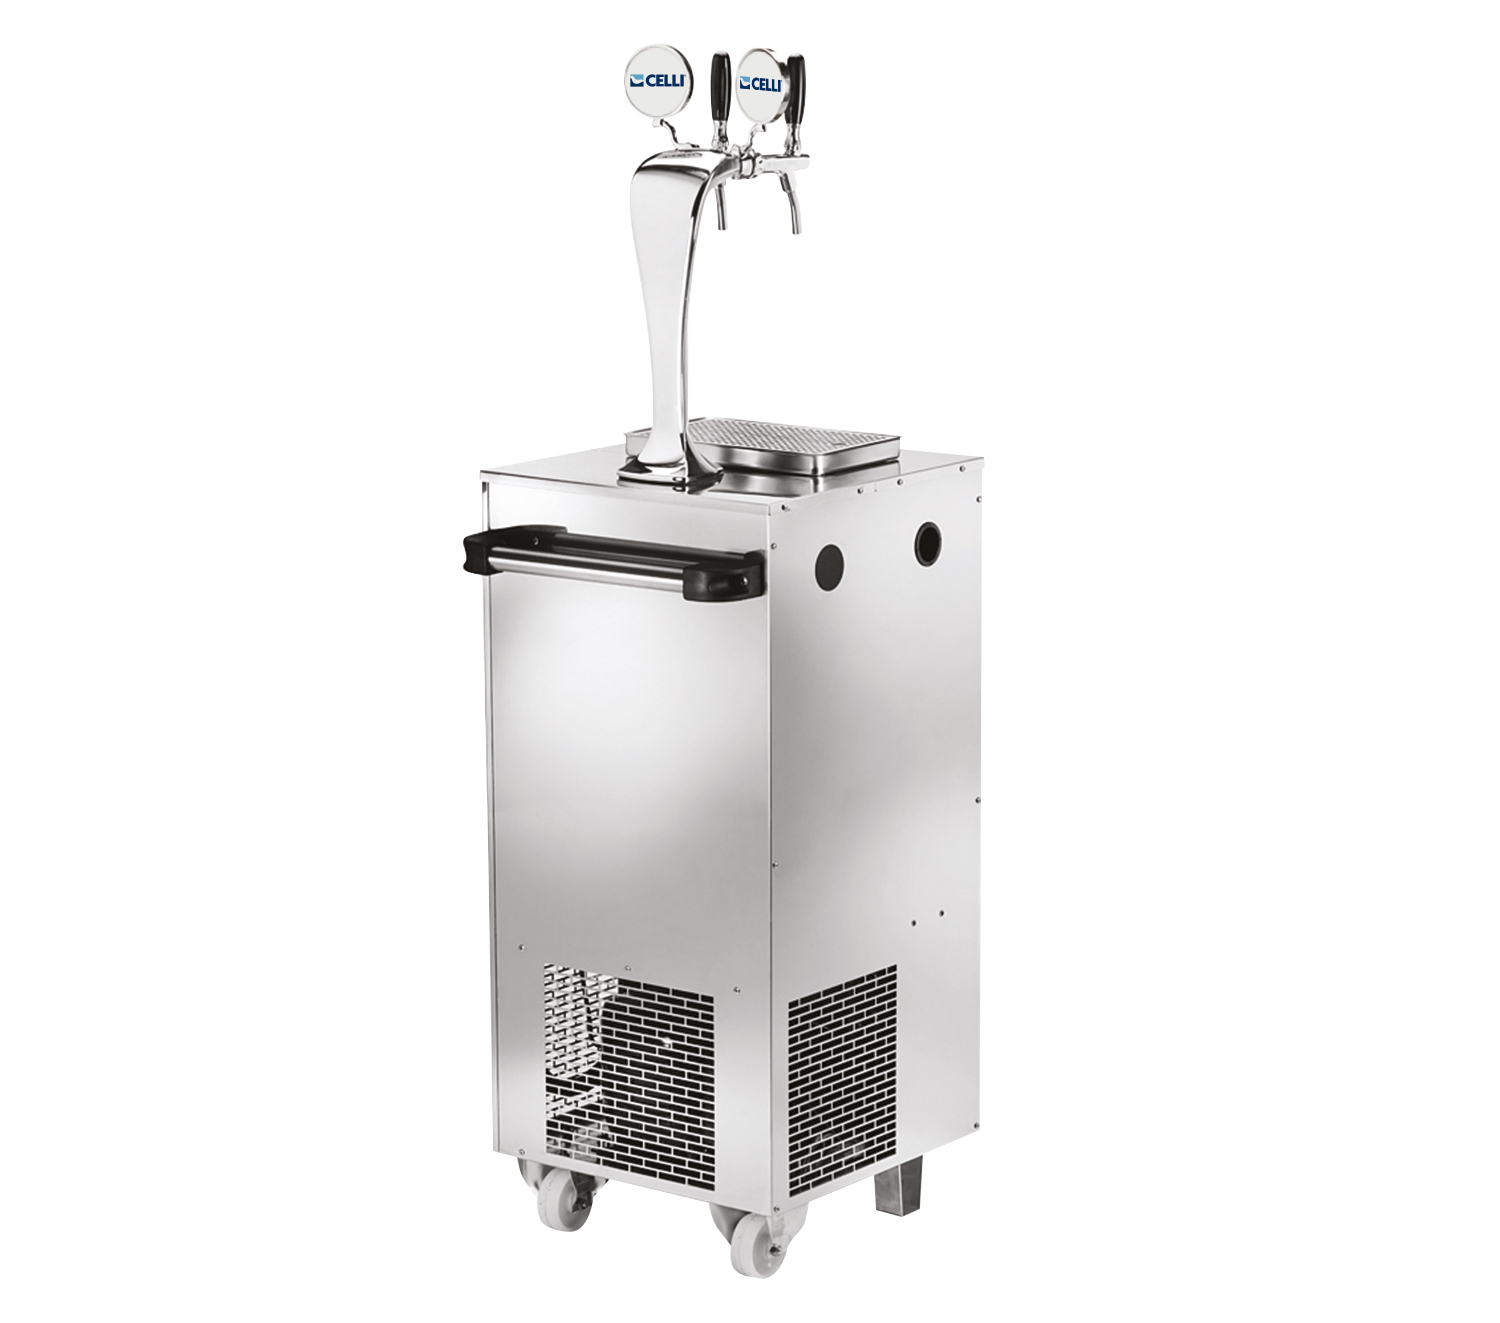 CELLI Geo 50/L on wheels - The best wheeled beer system